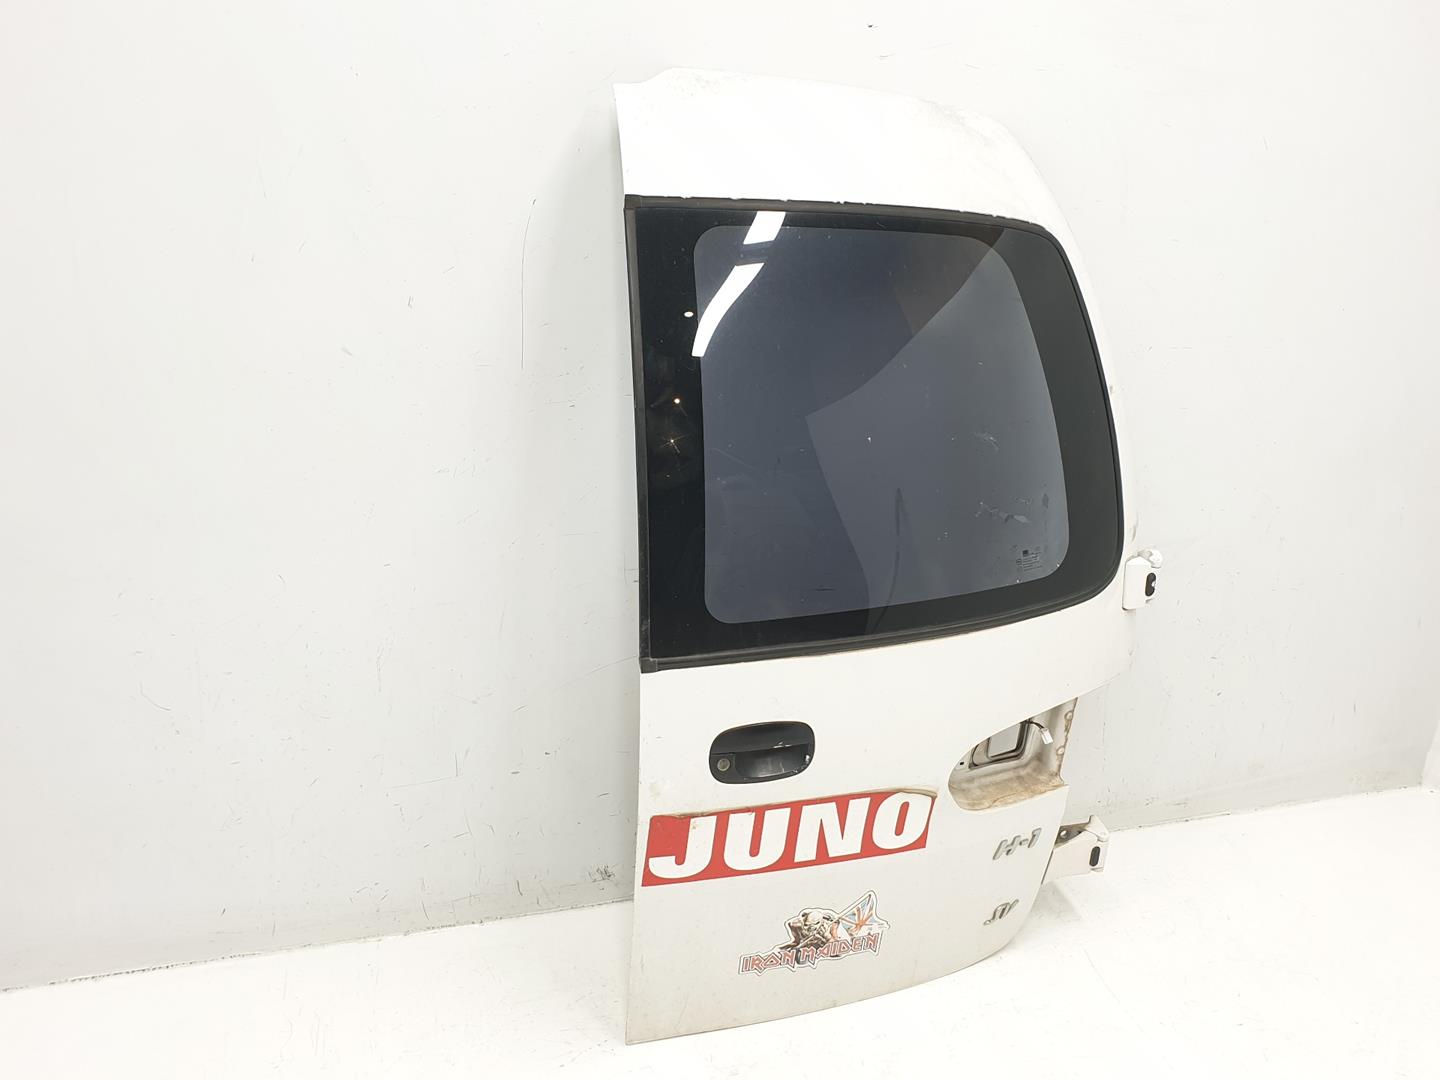 HYUNDAI H-1 Starex (1997-2007) Rear Right Door 737014A912, 737014A912, COLORBLANCOWISHWW 24551674